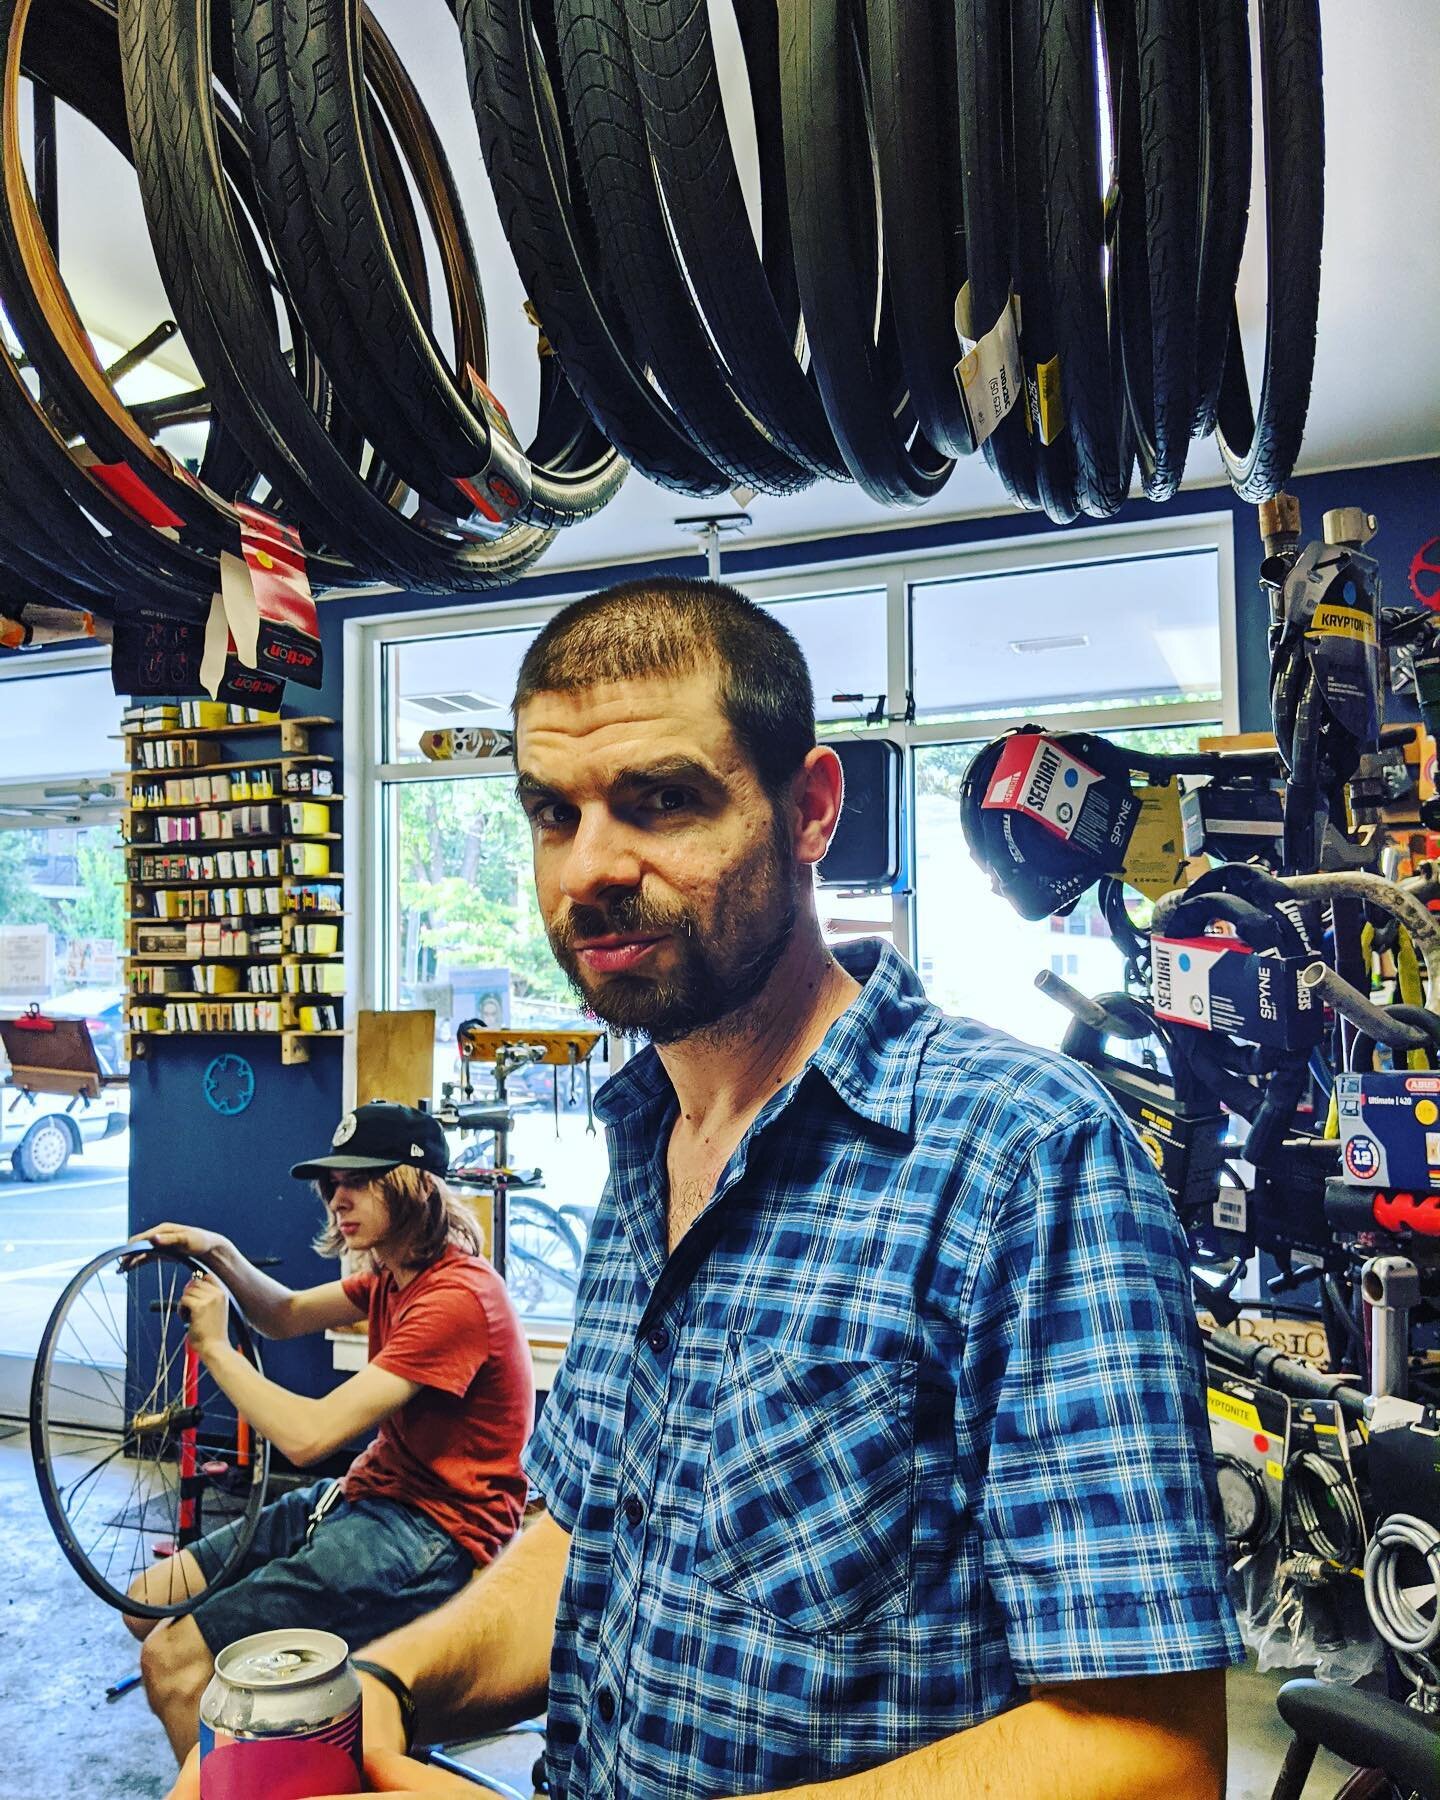 Father and son in the bike shop. 
⚙️🖤⚙️